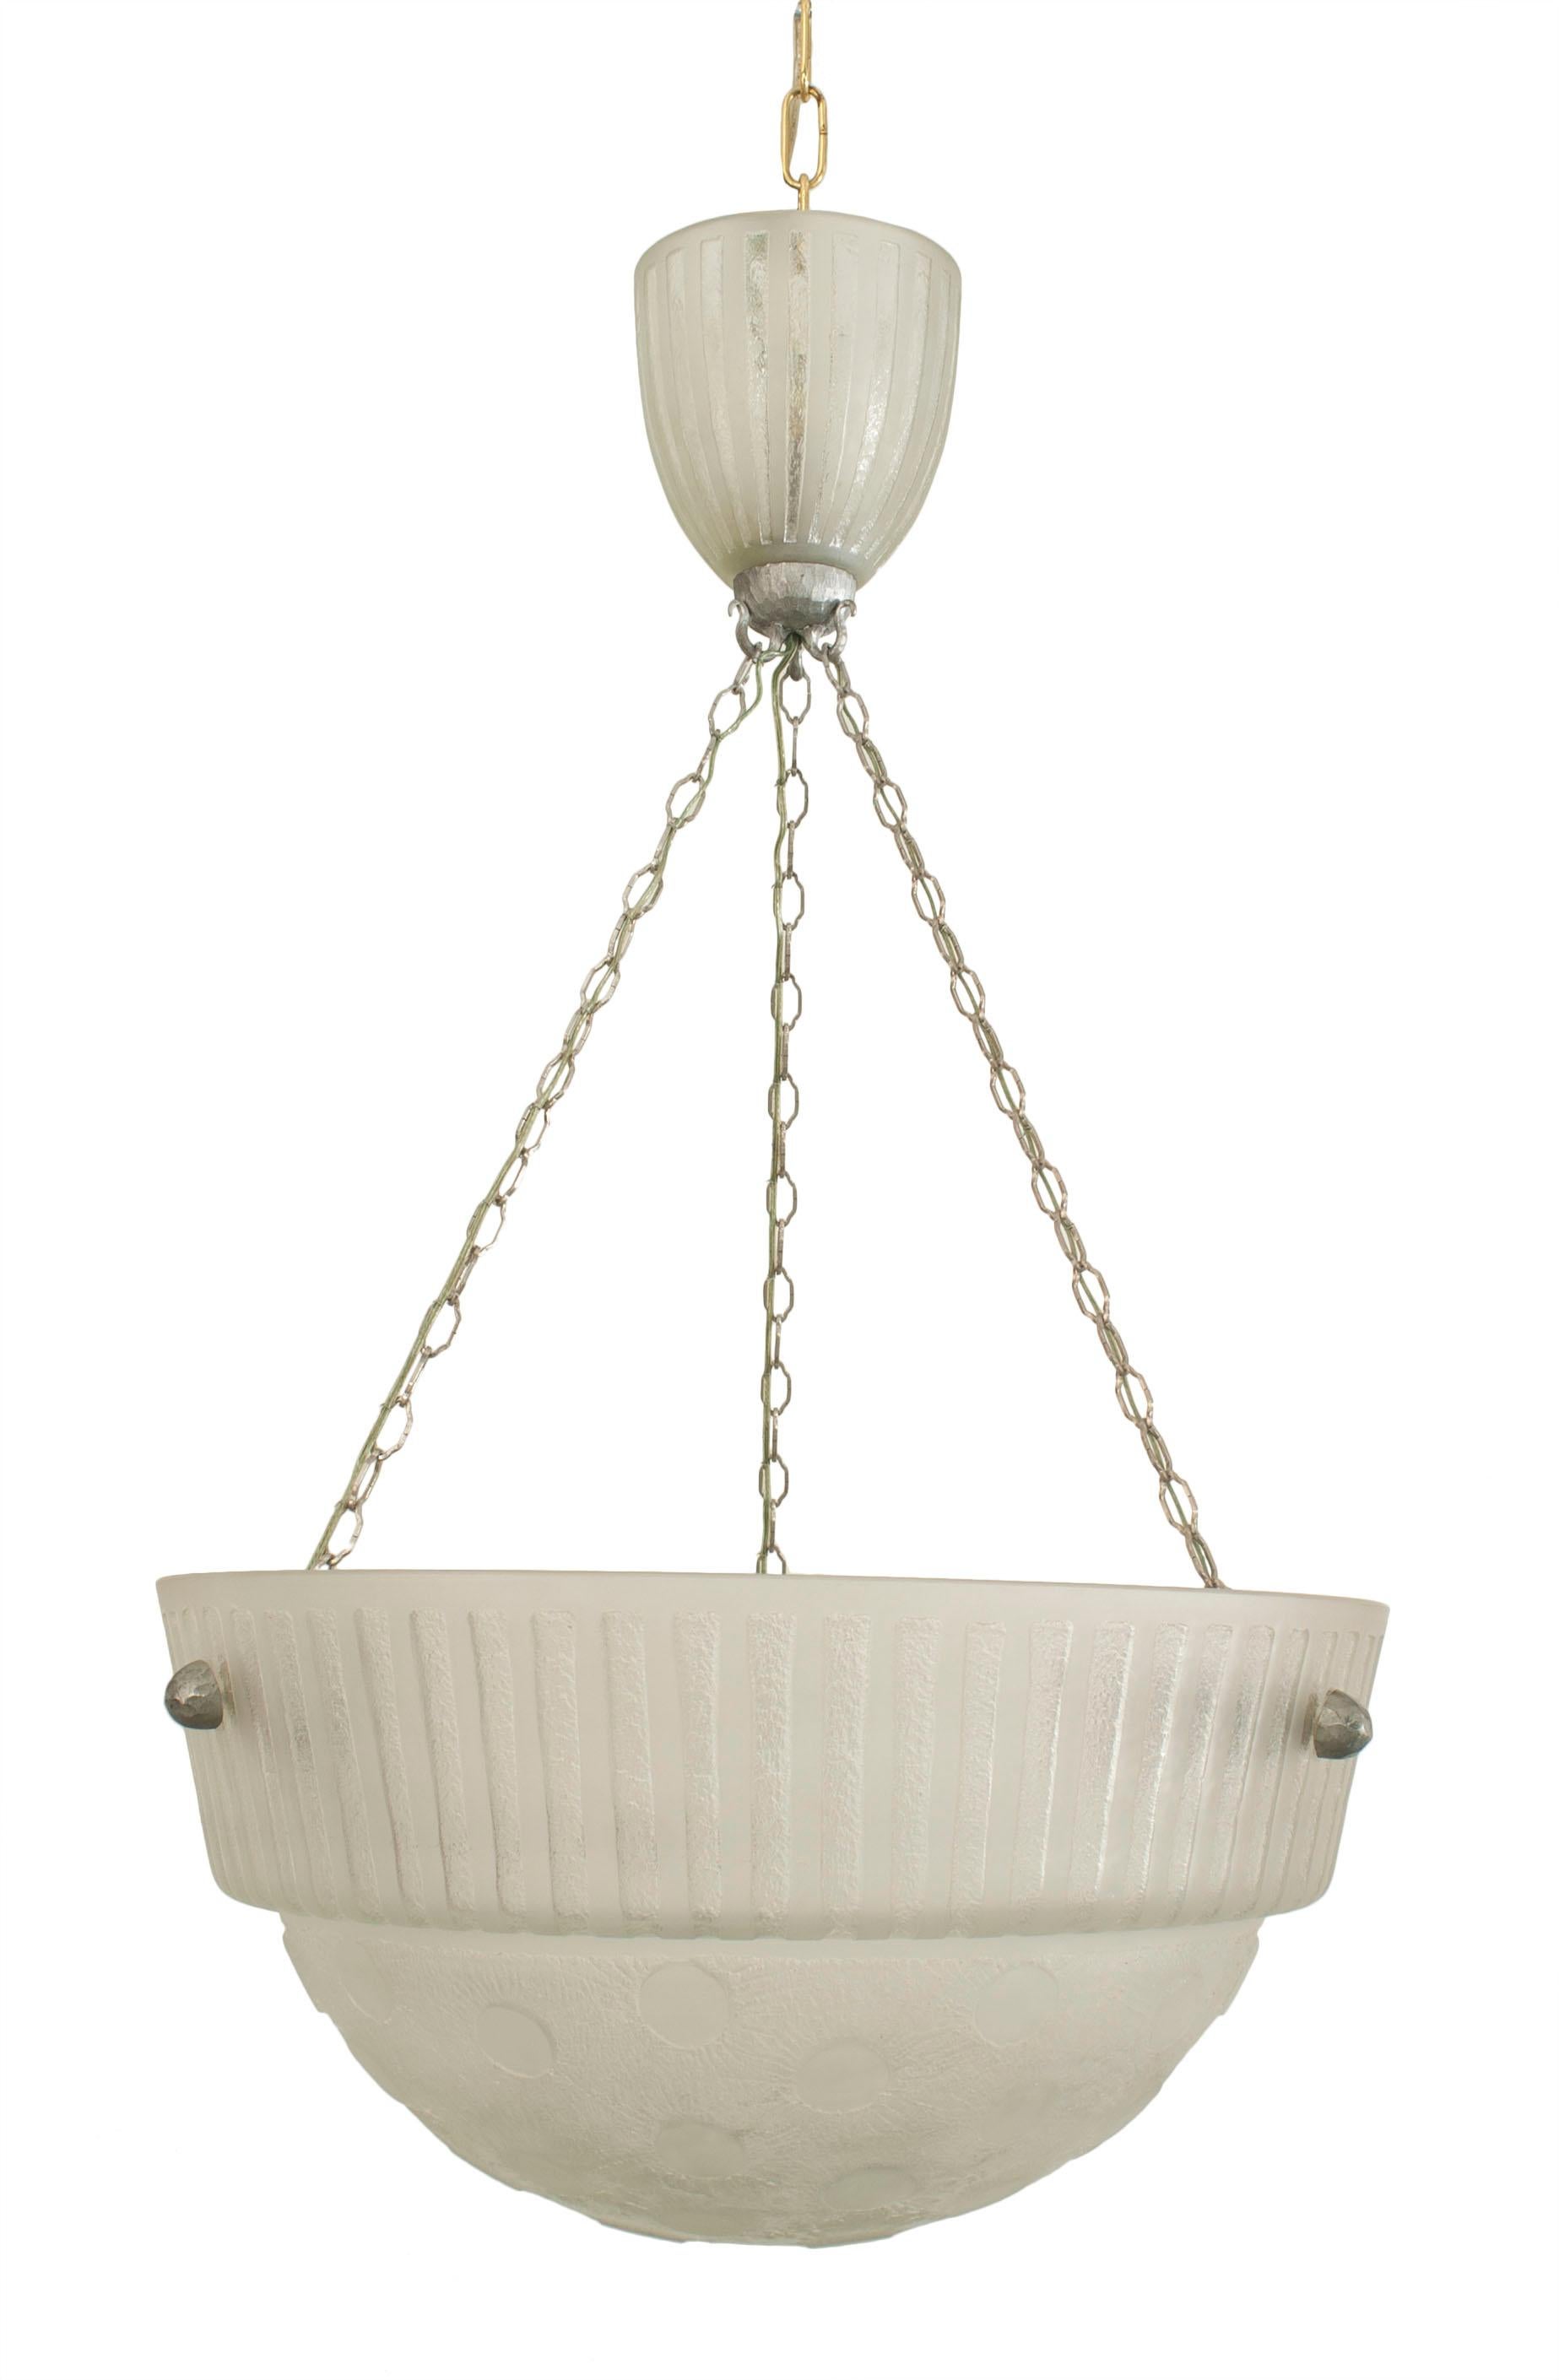 French Art Deco frosted glass large bowl form chandelier with a fluted top section below a 